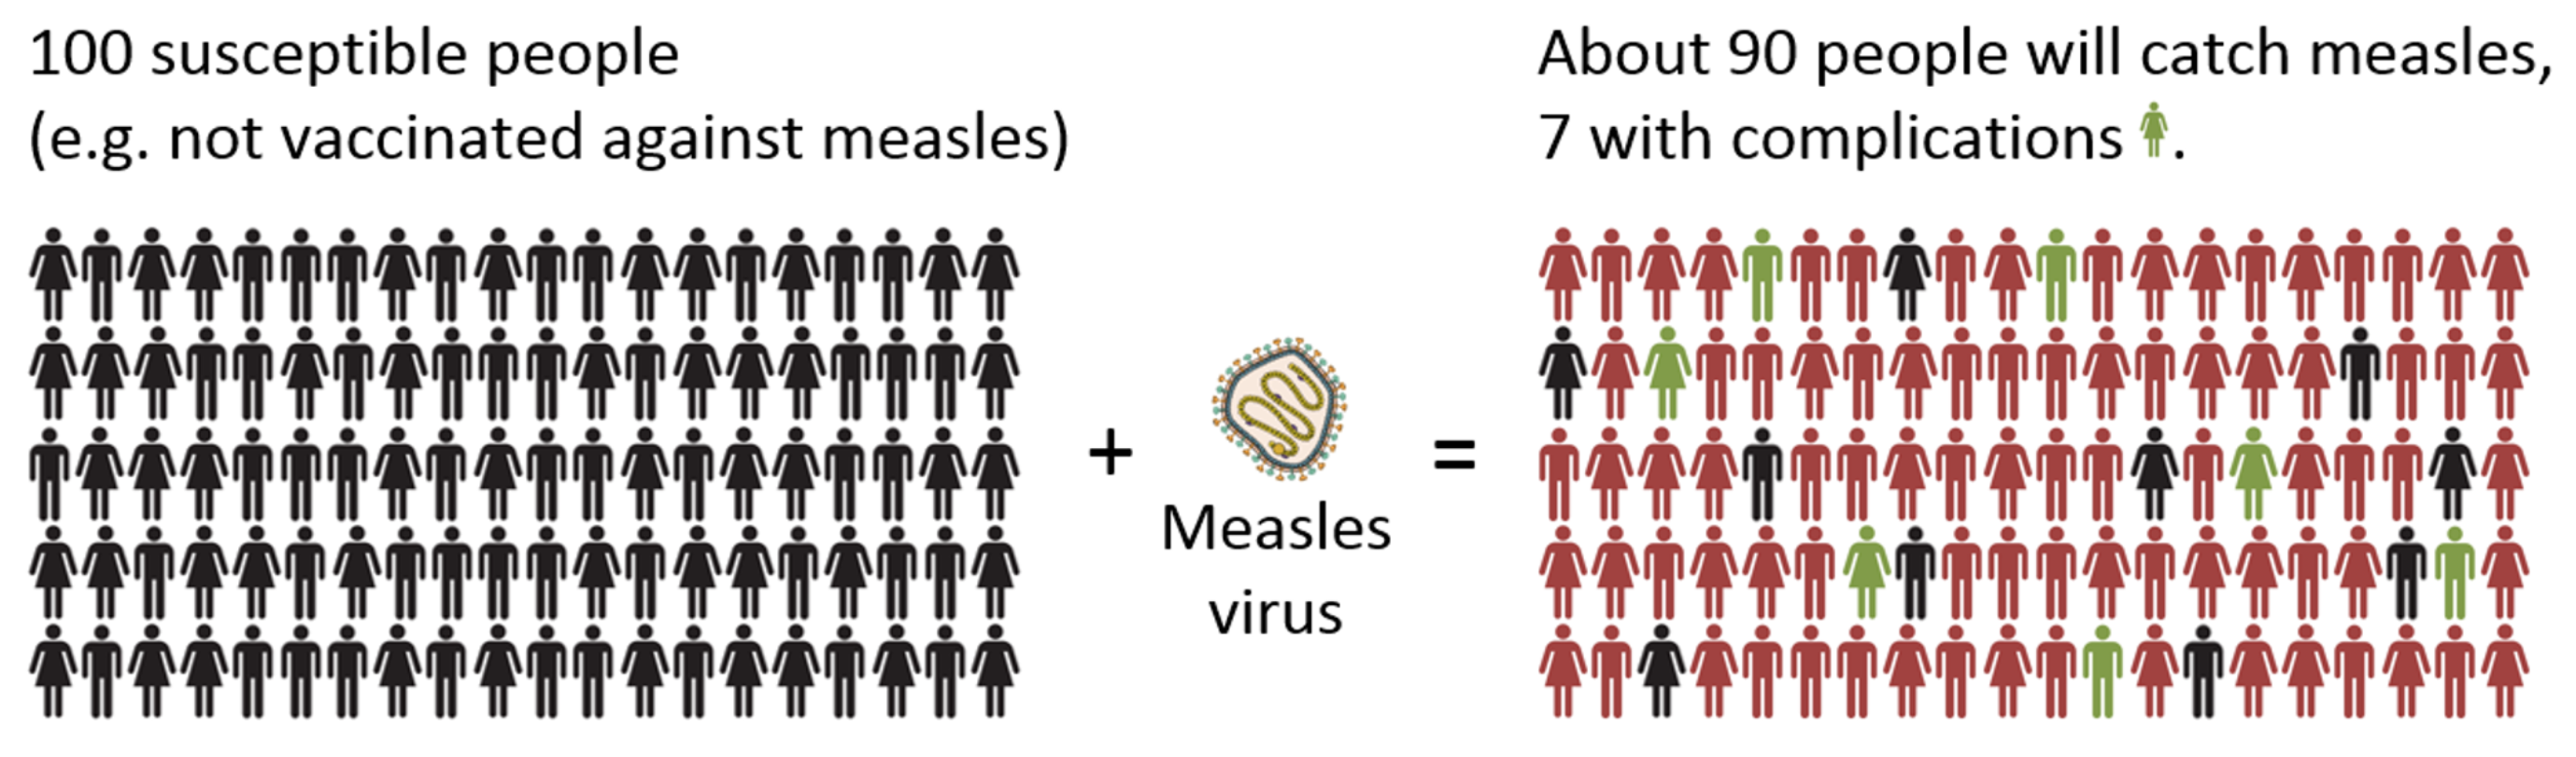 Infographic_measles.png